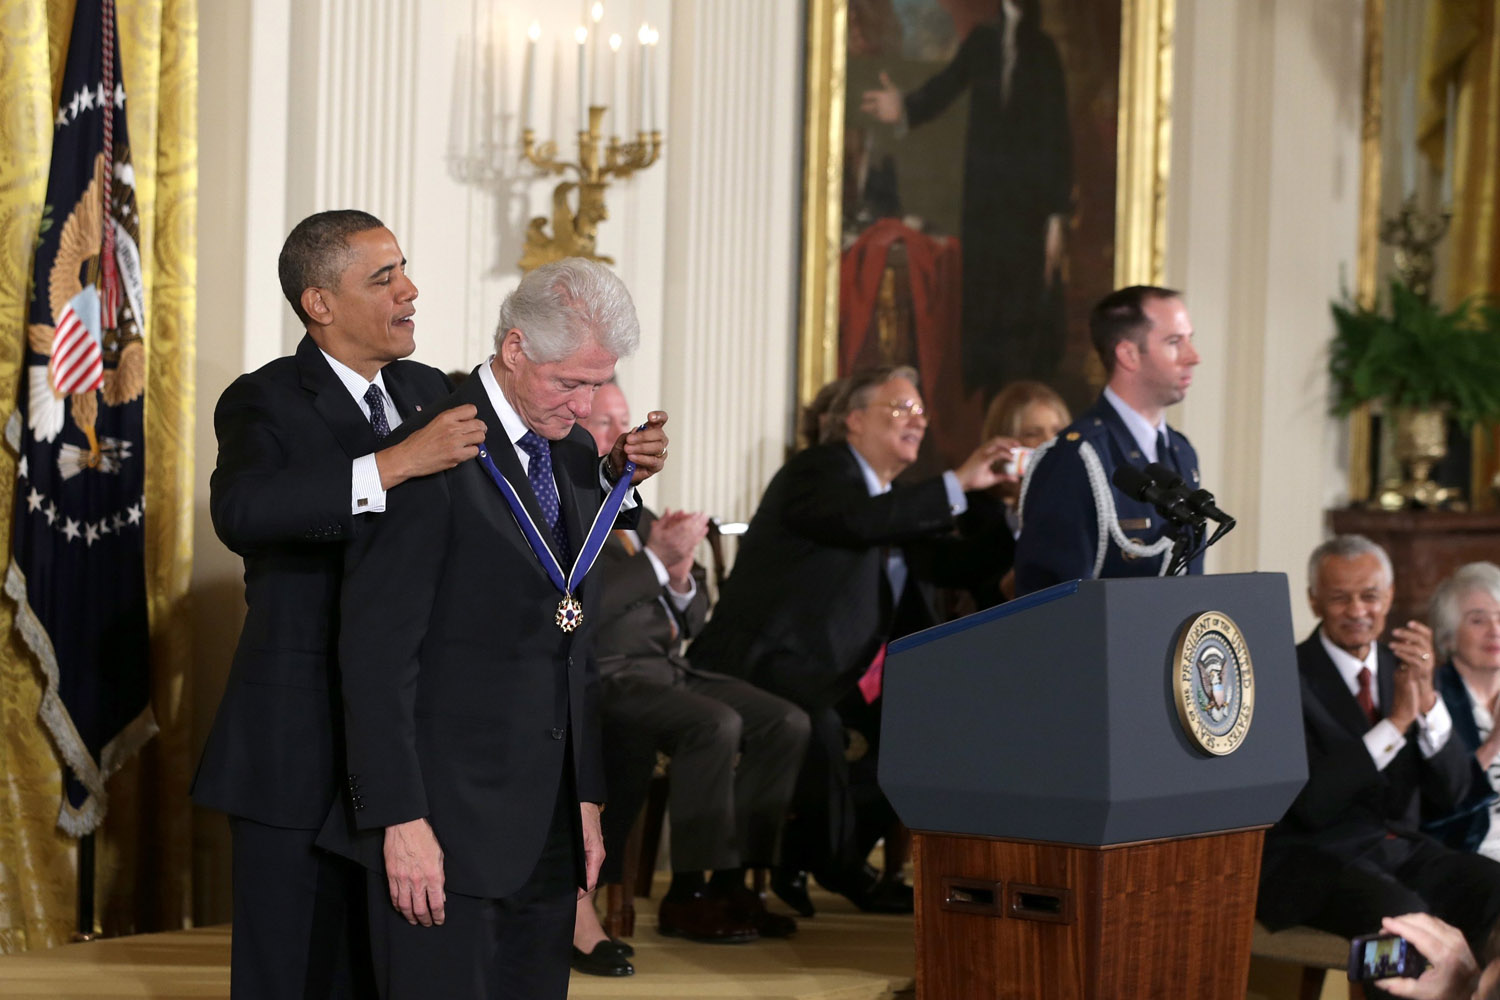 Nov. 20, 2013. U.S. President Barack Obama (L) awards the Presidential Medal of Freedom to former U.S. President Bill Clinton in the East Room at the White House in Washington.